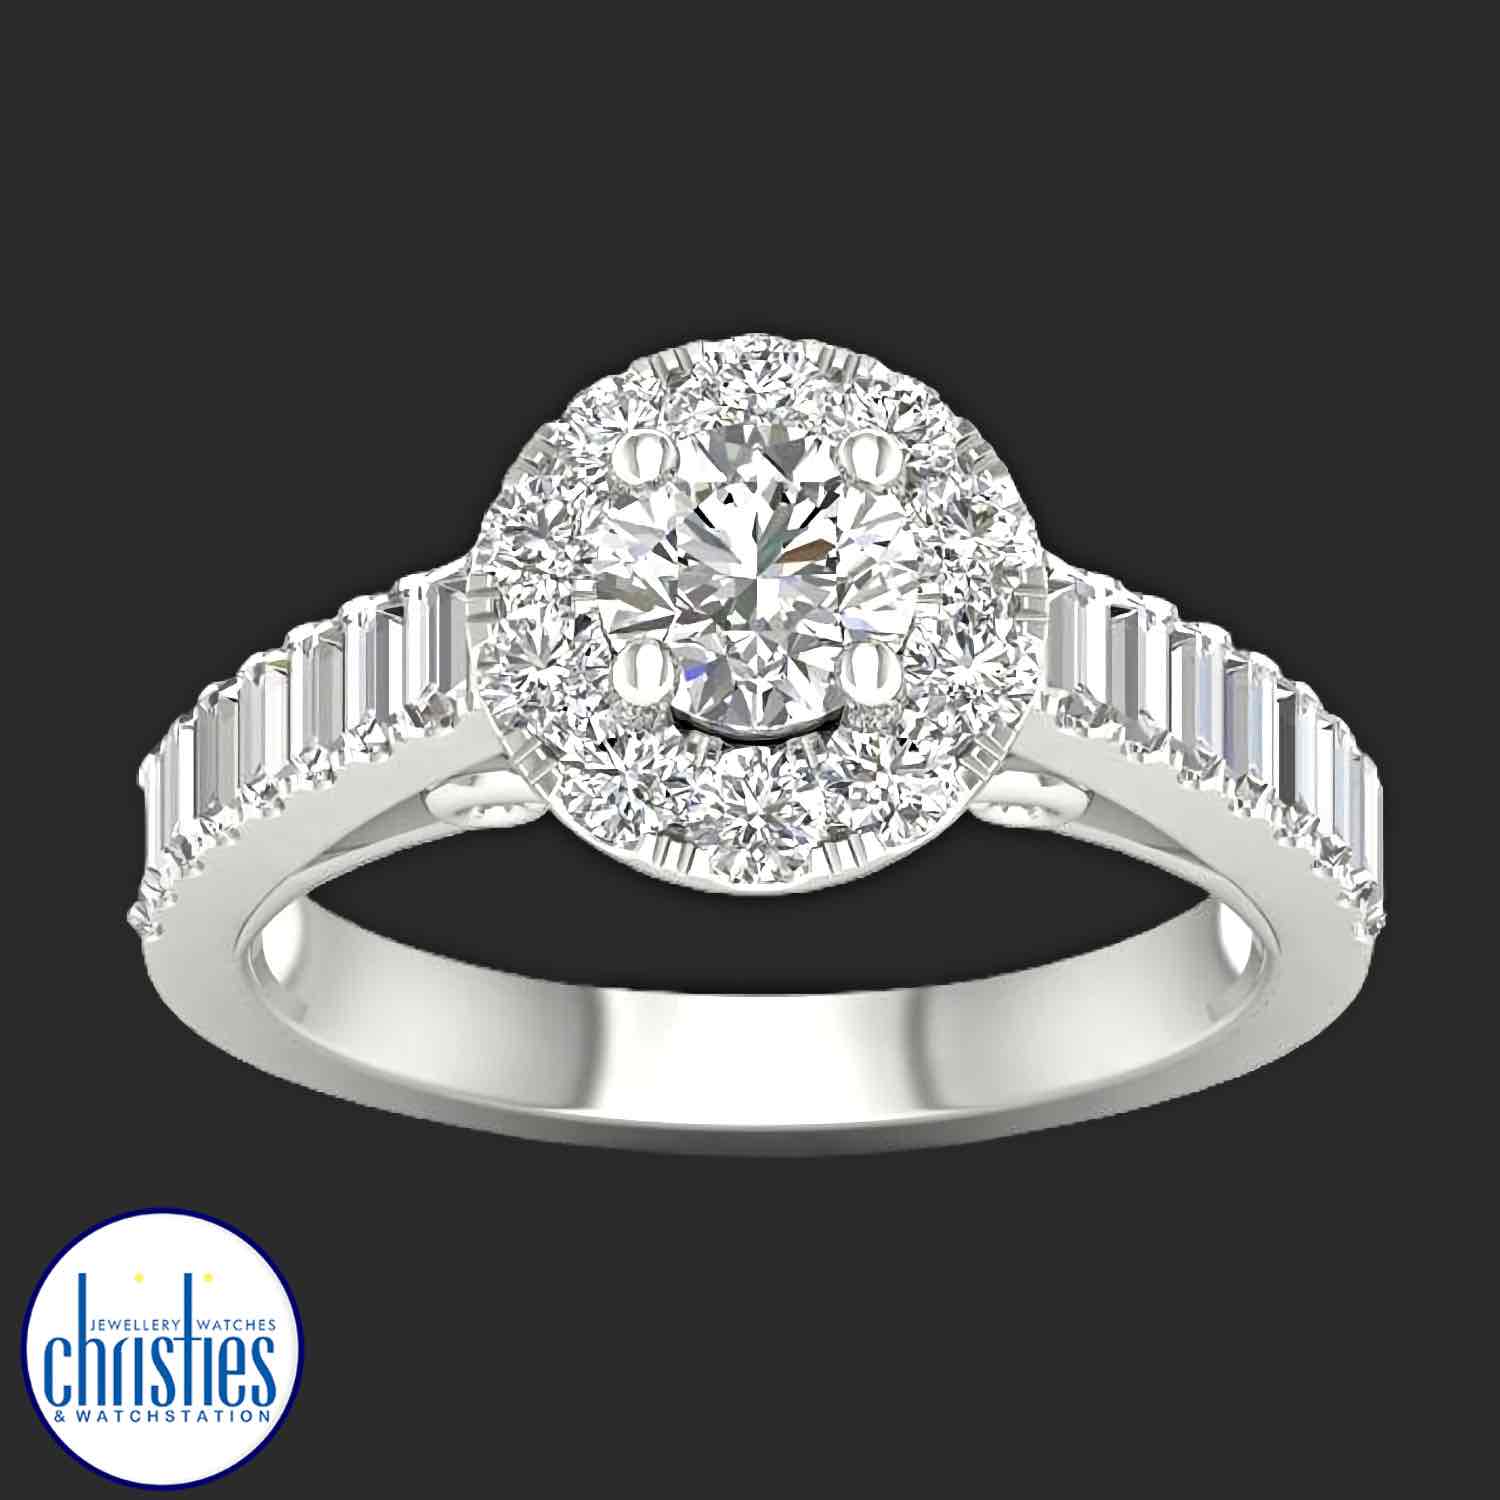 18ct White Gold Diamond Wedding Set 0.1.00ct TDW RB15838.  Affordable Engagement Rings Nz $4,995.00